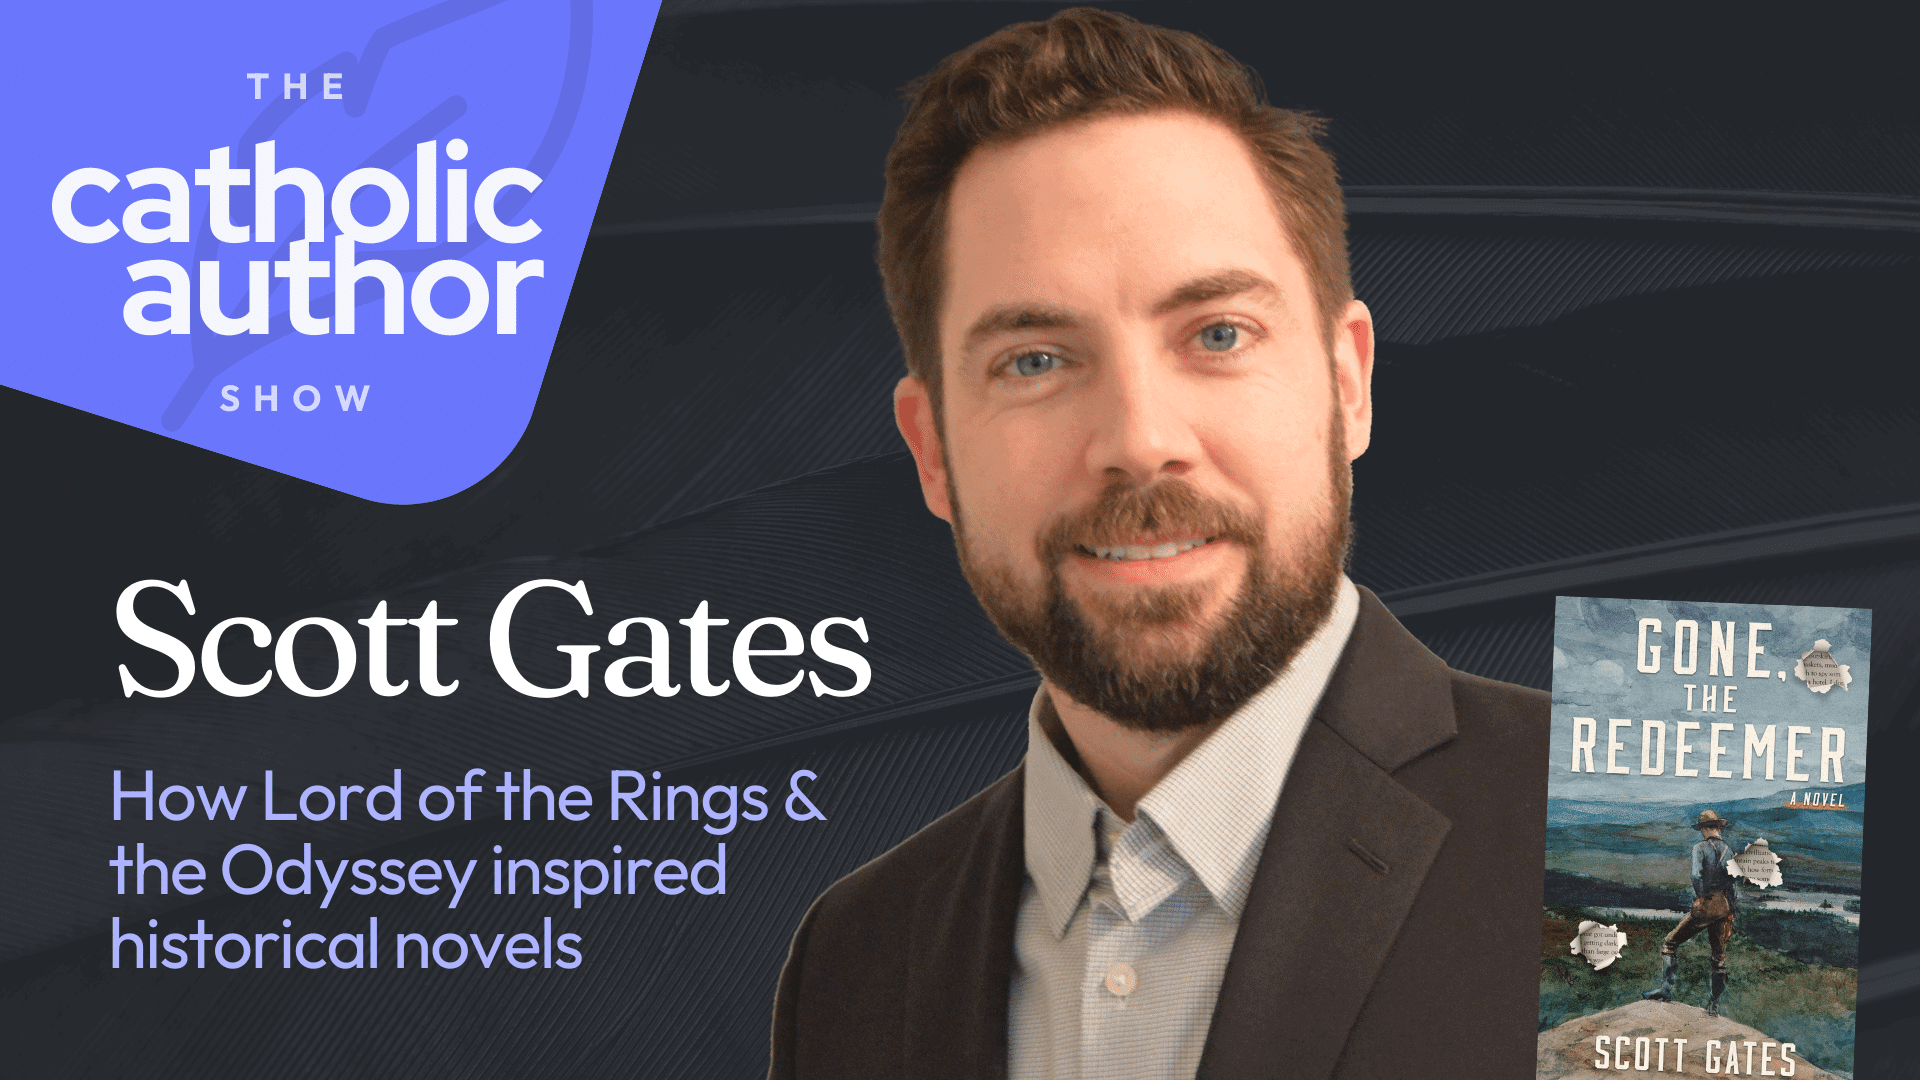 How Lord of the Rings & the Odyssey inspired historical novels, with Scott Gates